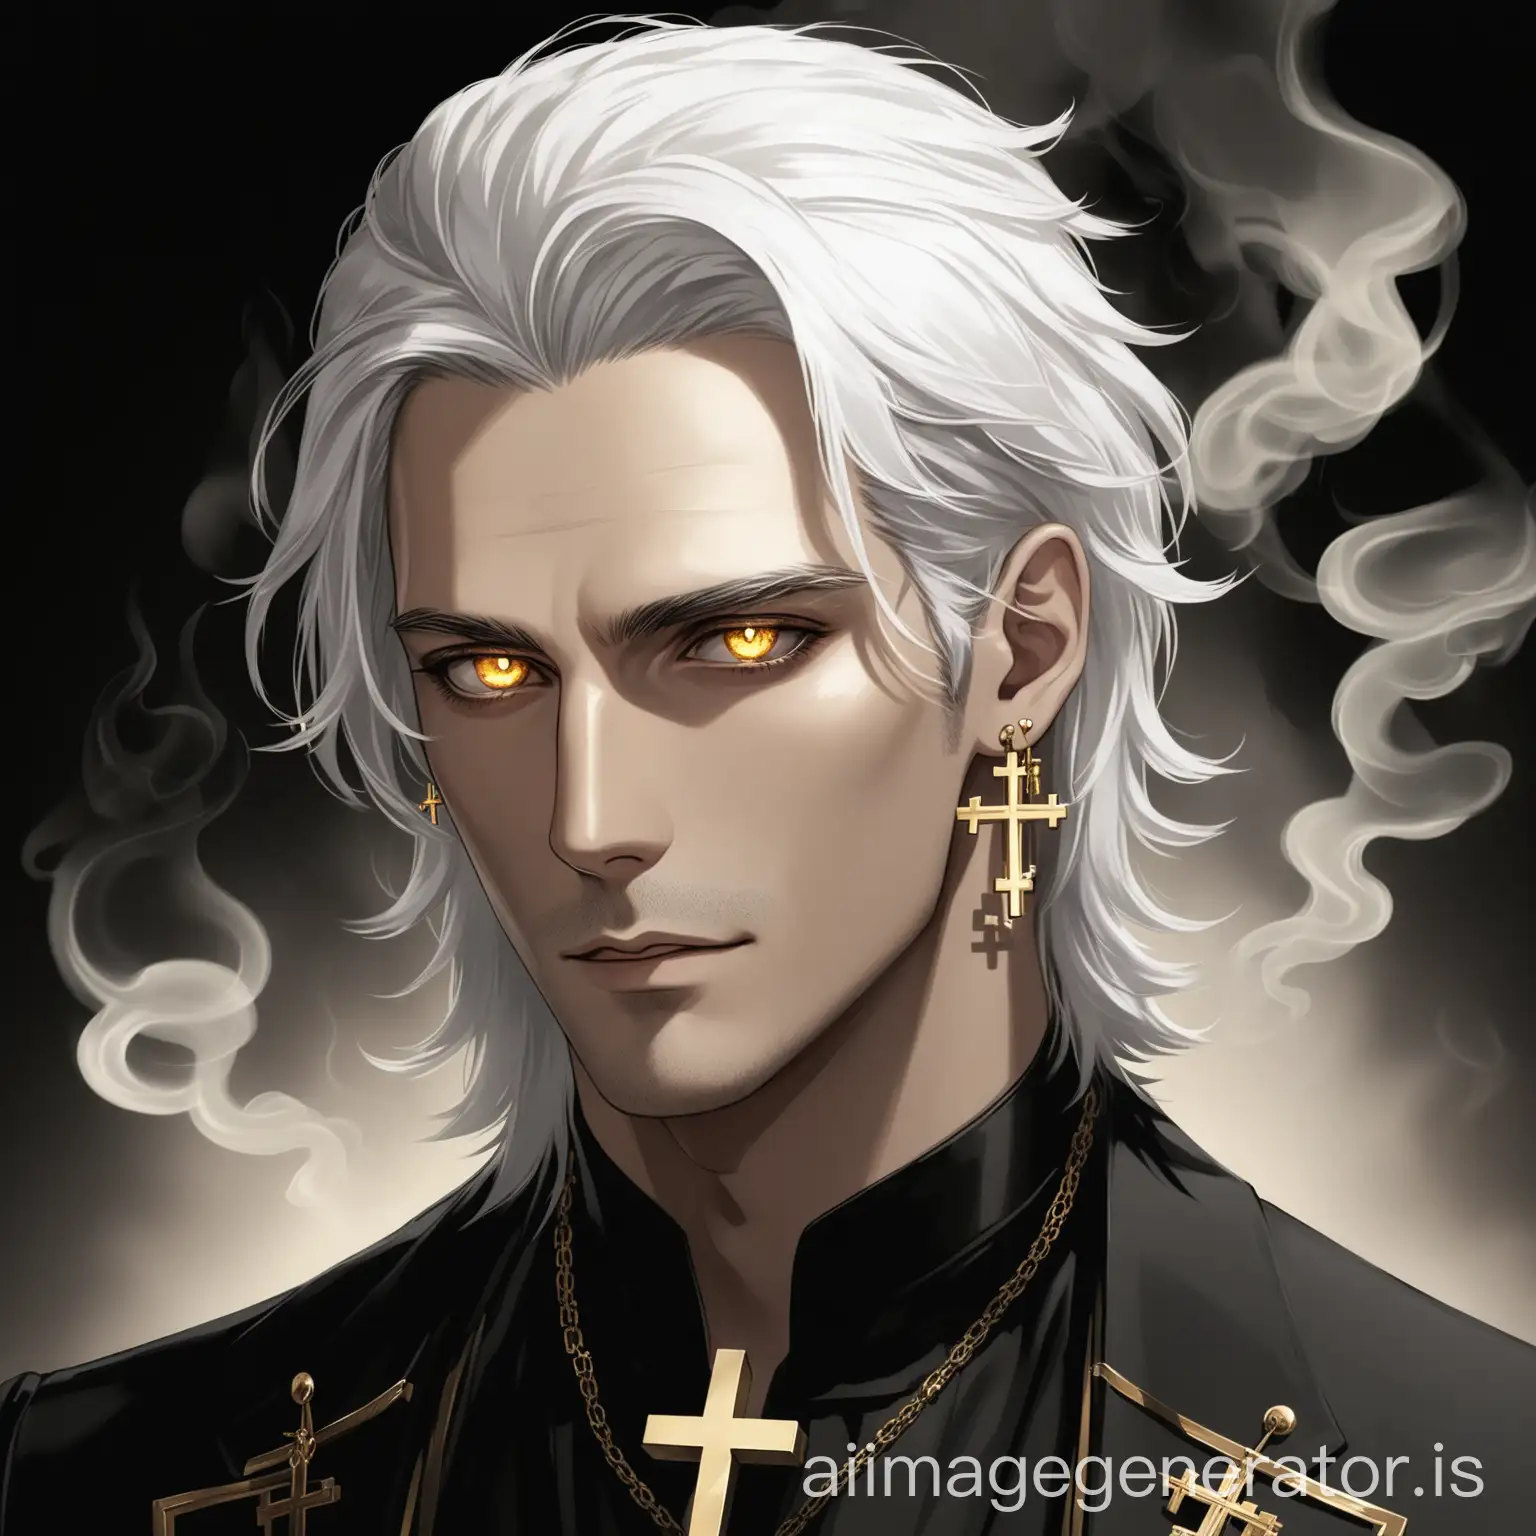 Elegant-WhiteHaired-Man-with-Golden-Eyes-and-Unique-Accessories